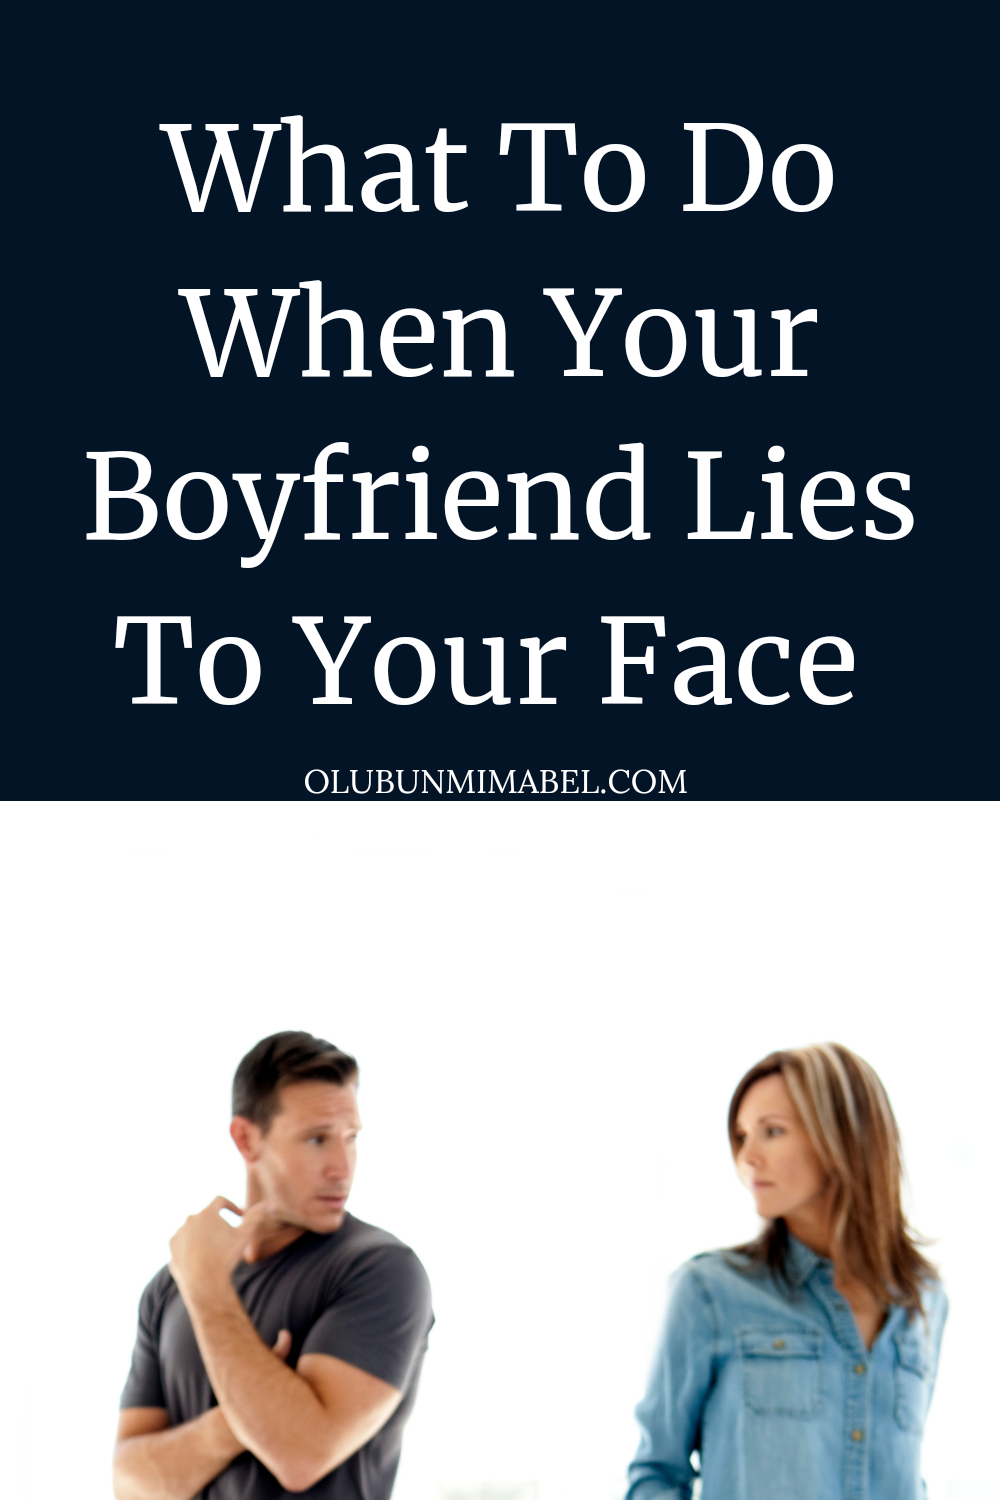 What To Do When Your Boyfriend Lies To Your Face